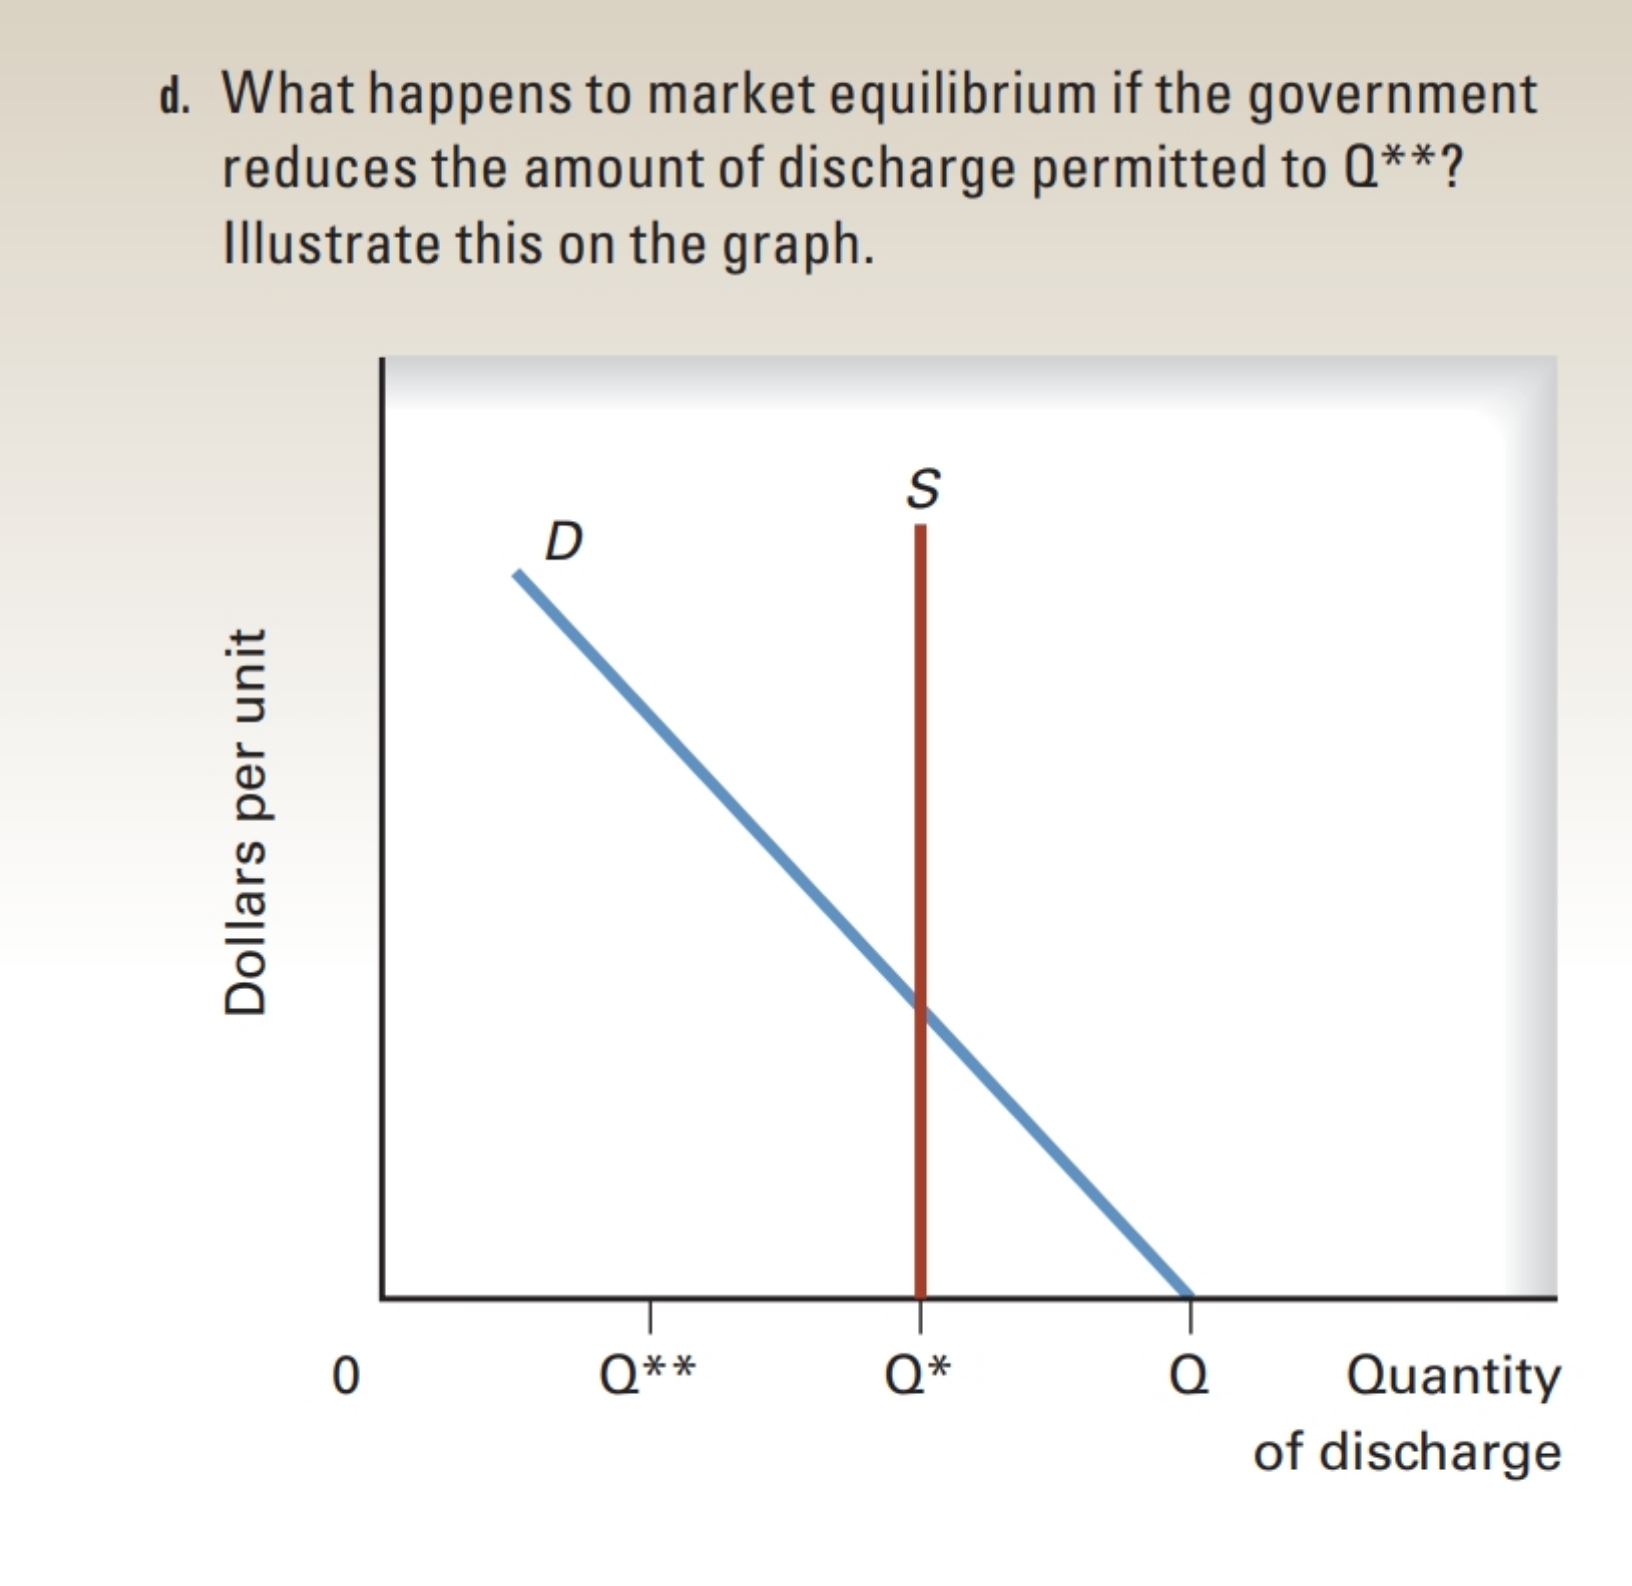 ns to market equilibrium if the government
amount of discharge permitted to Q**?
s on the graph.
